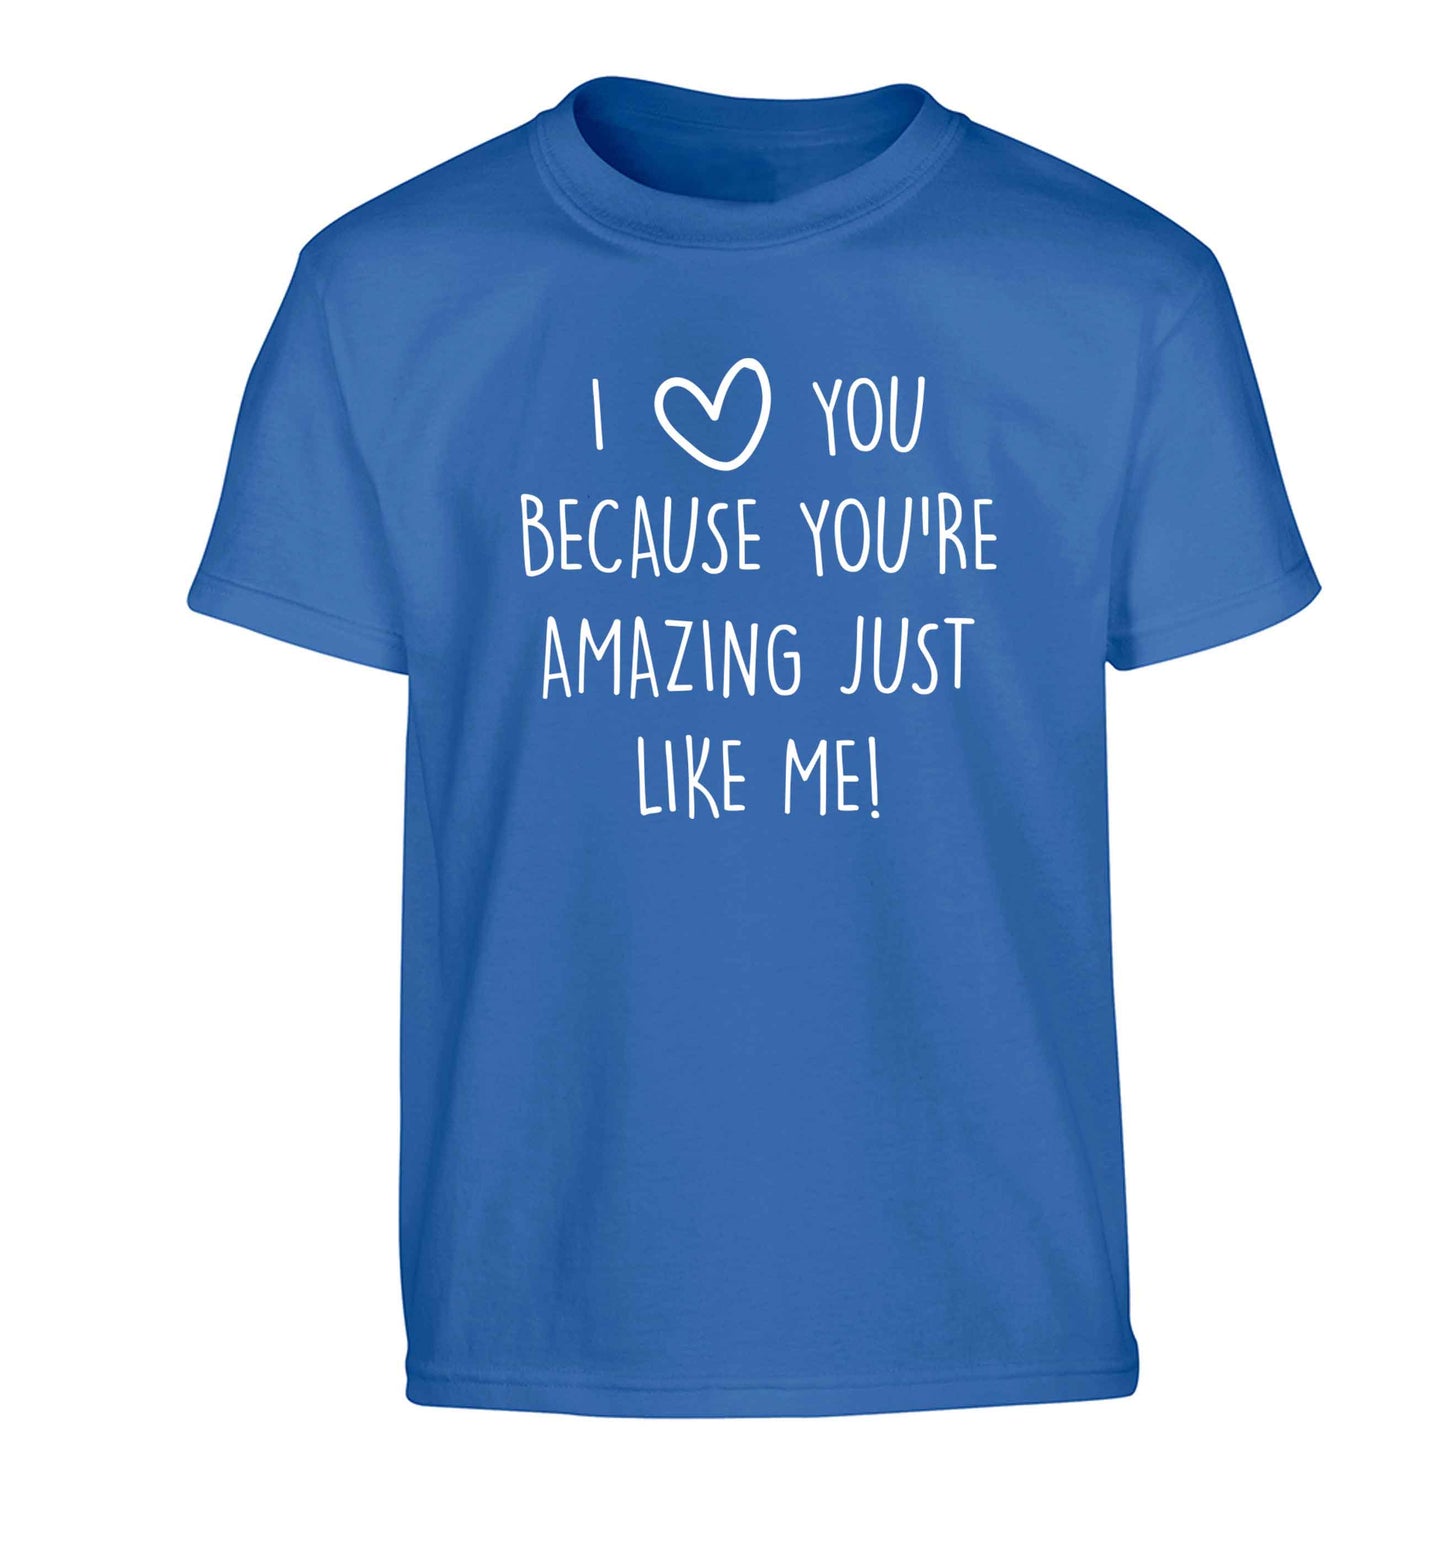 I love you because you're amazing just like me Children's blue Tshirt 12-13 Years